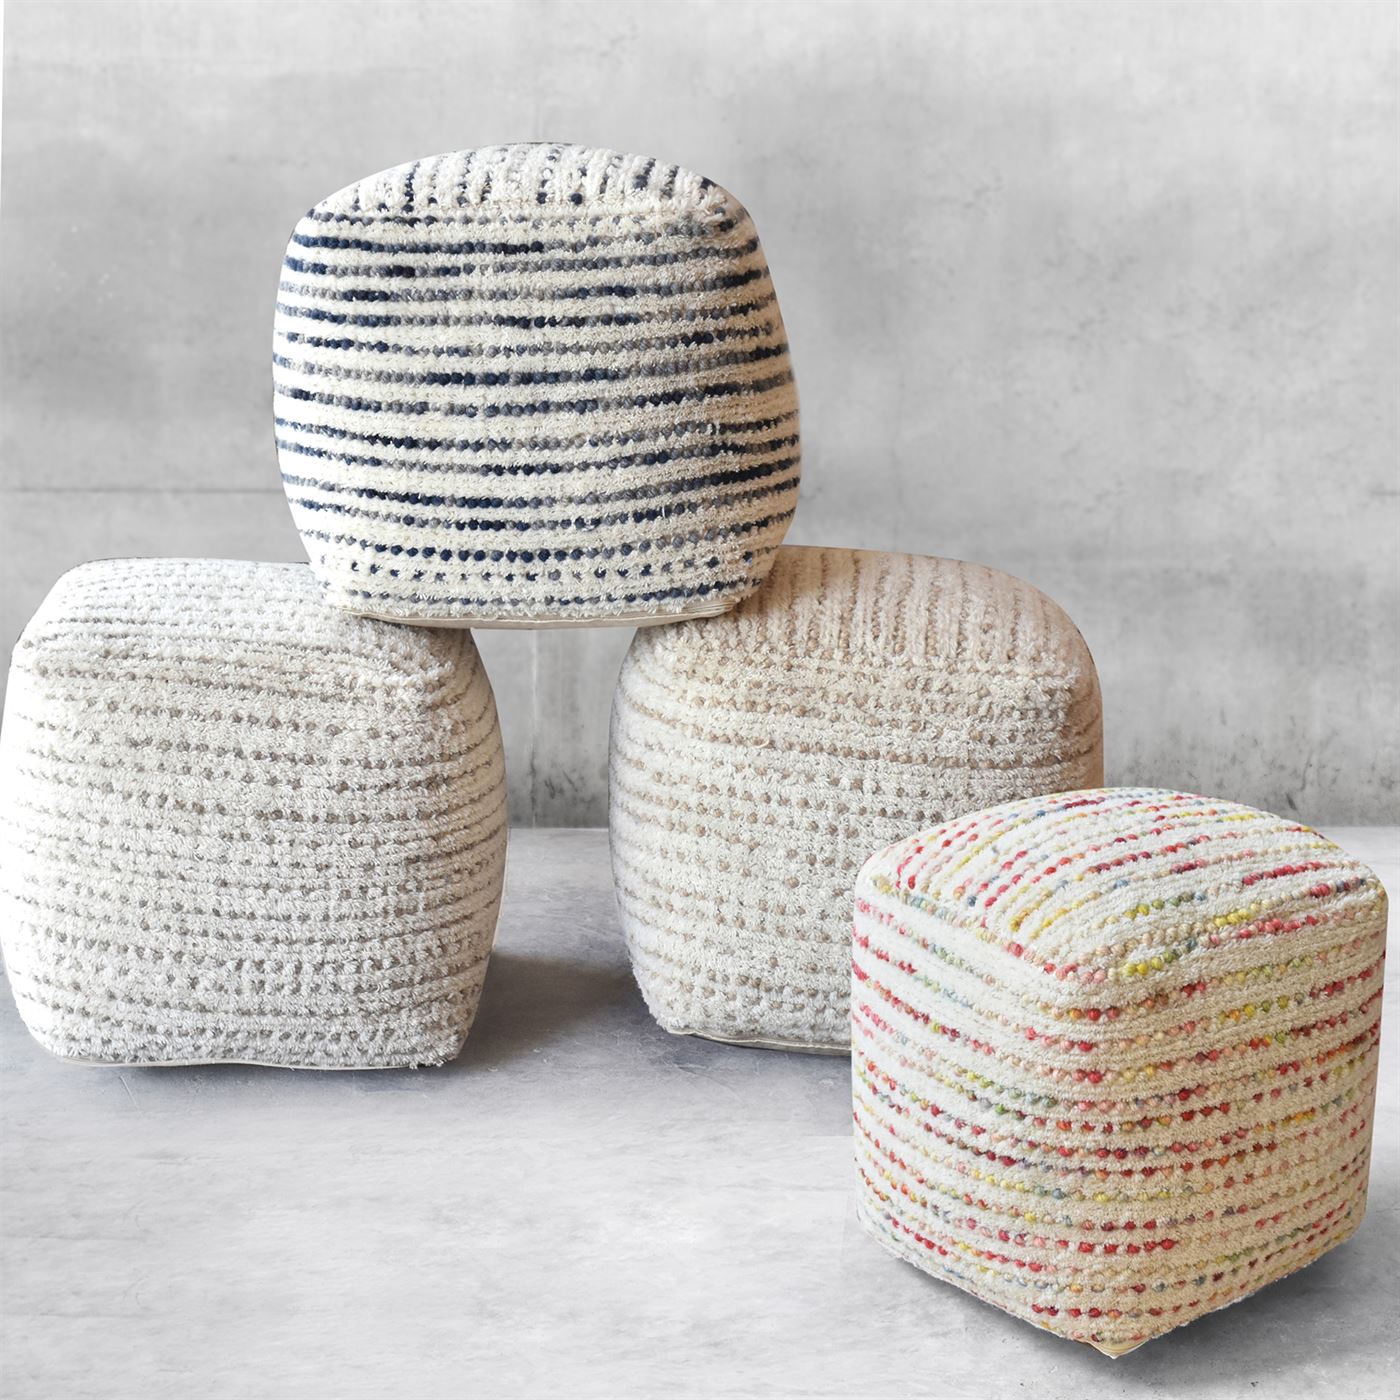 Amorica Pouf, Wool, Hand Woven, Cut And Loop